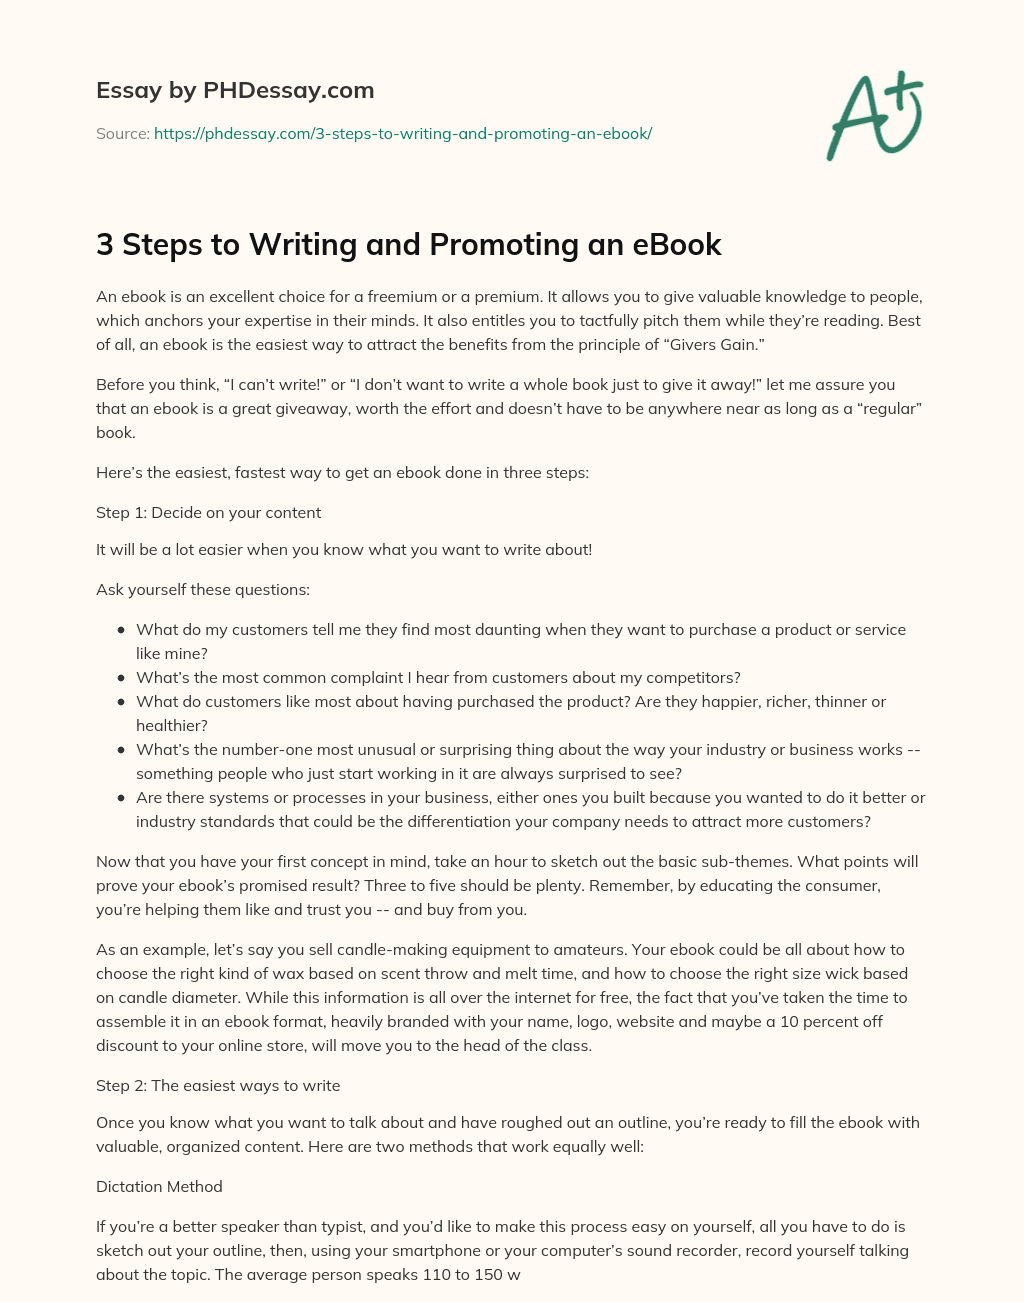 3 Steps to Writing and Promoting an eBook essay